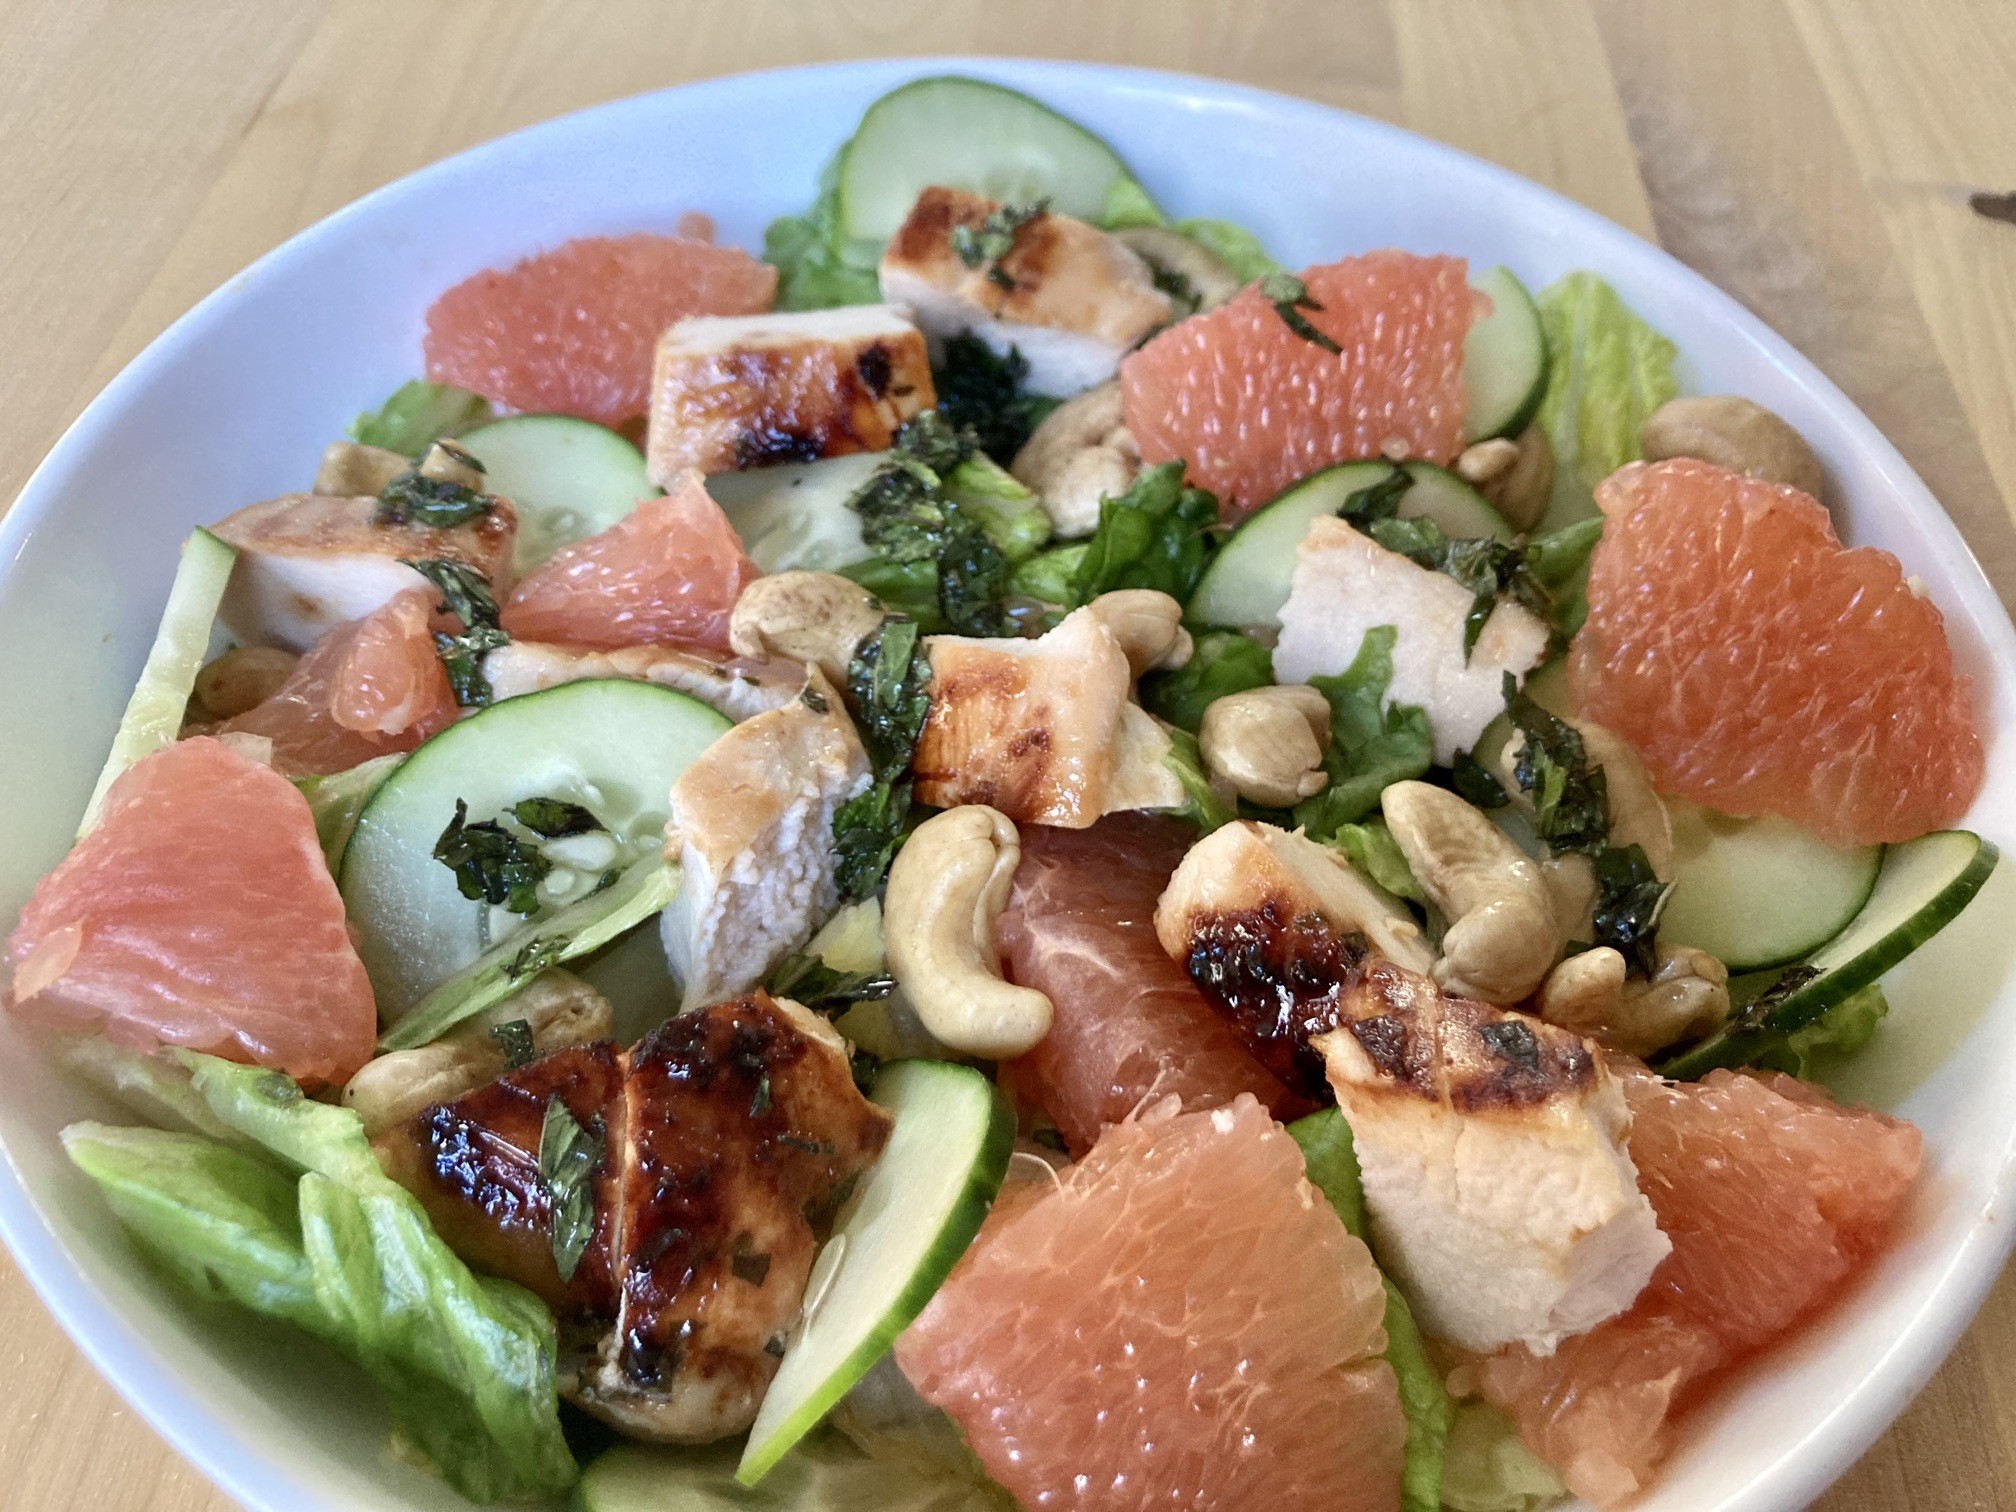 chicken, grapefruit pieces, cucumbers, and cashews over lettuce in the grapefruit grilled chicken salad